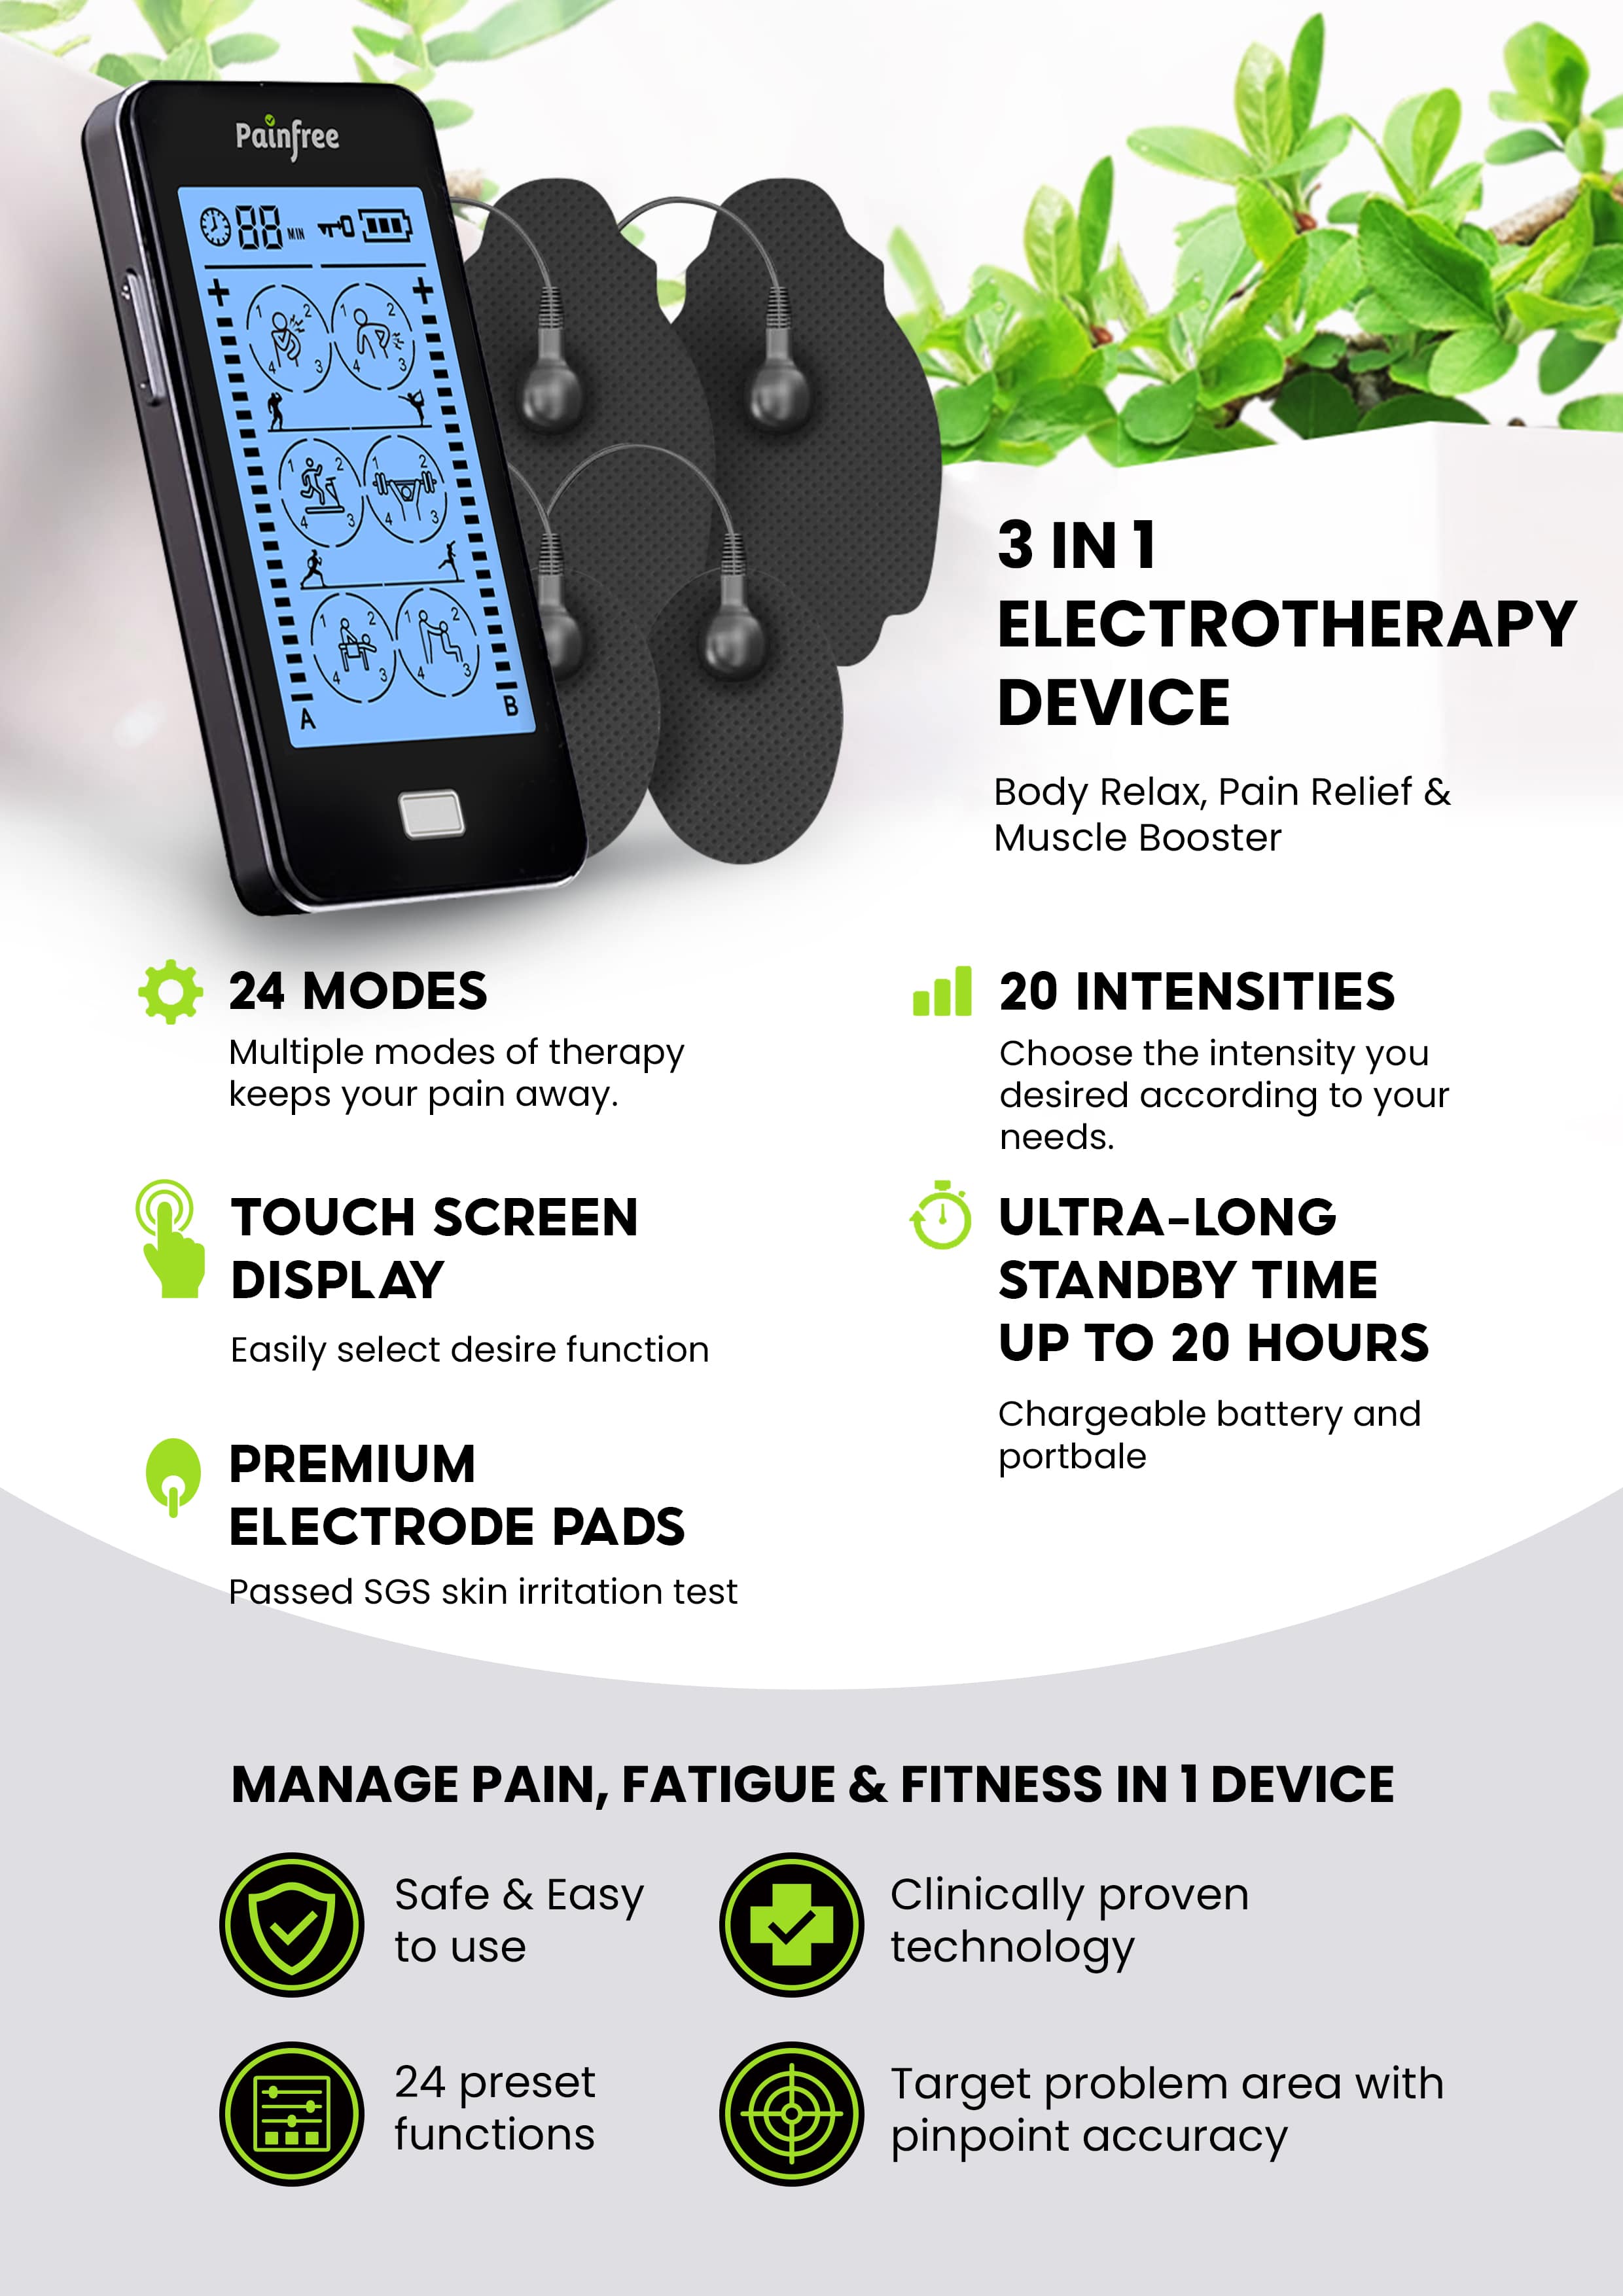 Painfree 3 in 1 Electrotherapy Device – iQueen